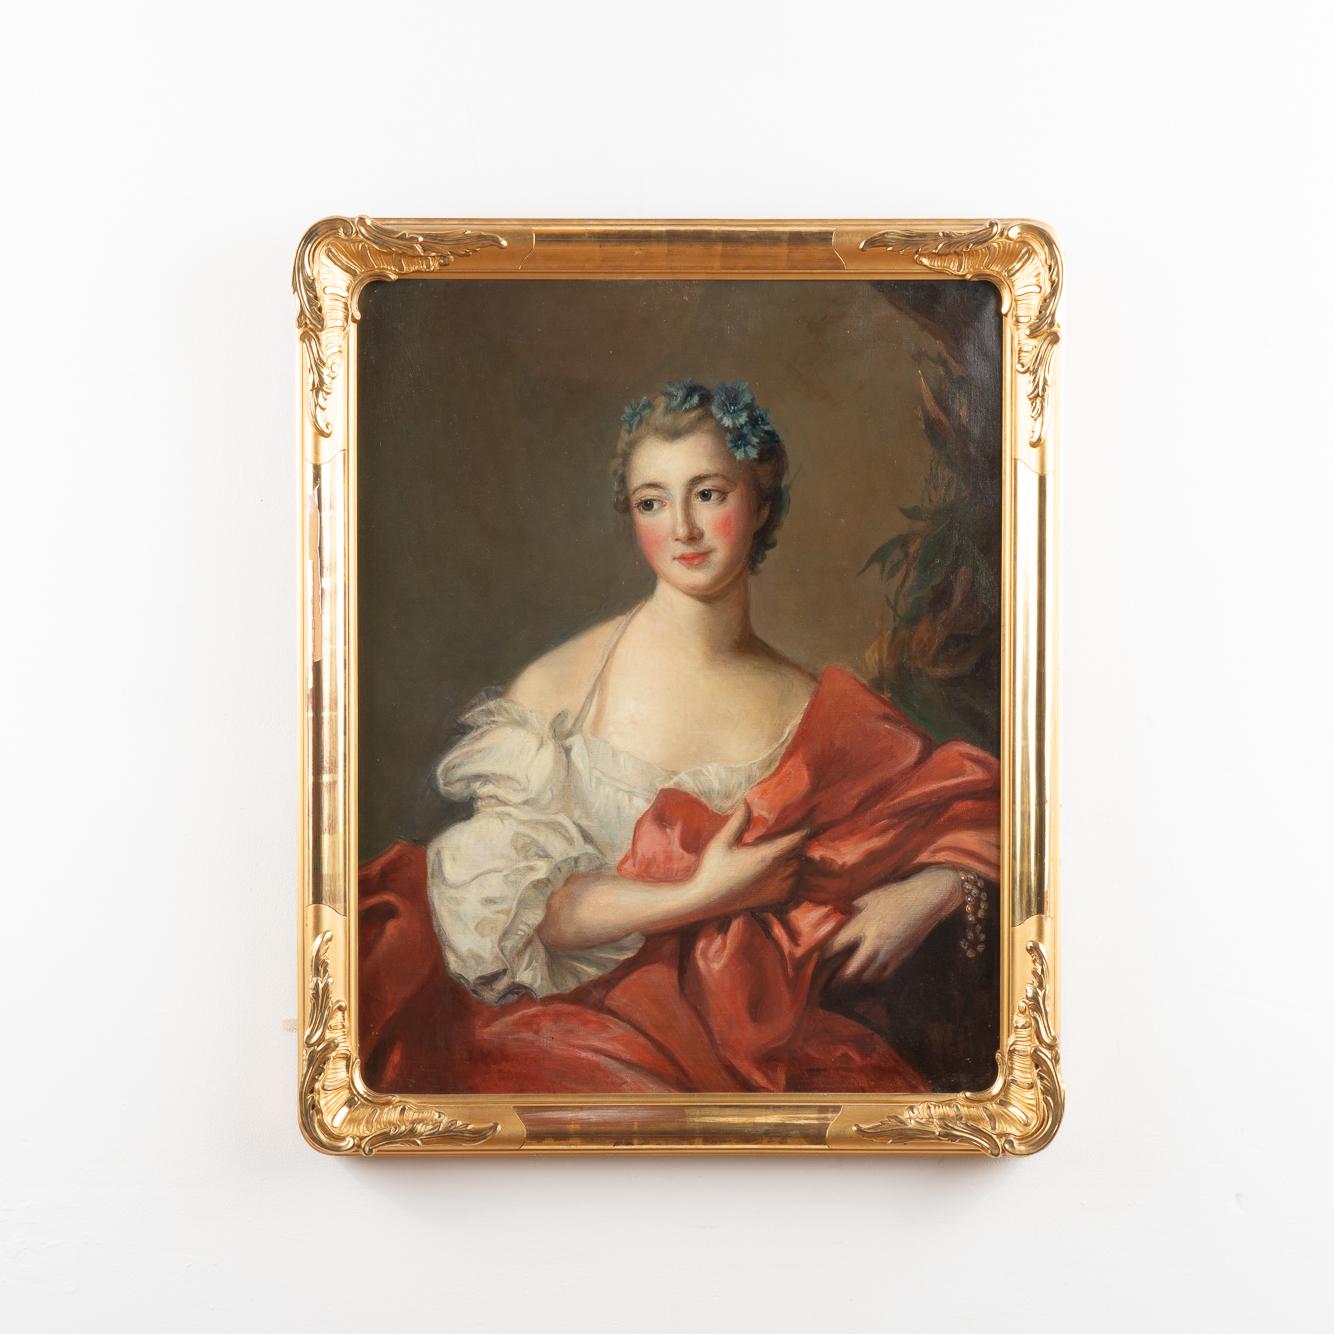 An original oil on canvas portrait of Élisabeth-Louise de Boullogne, Marquise de l'Hôpital (1721-1767), lady-in-waiting. The original portrait by Jean Marc Nattier (1685-1766) hangs in the National Museum, while this reproduction was likely executed